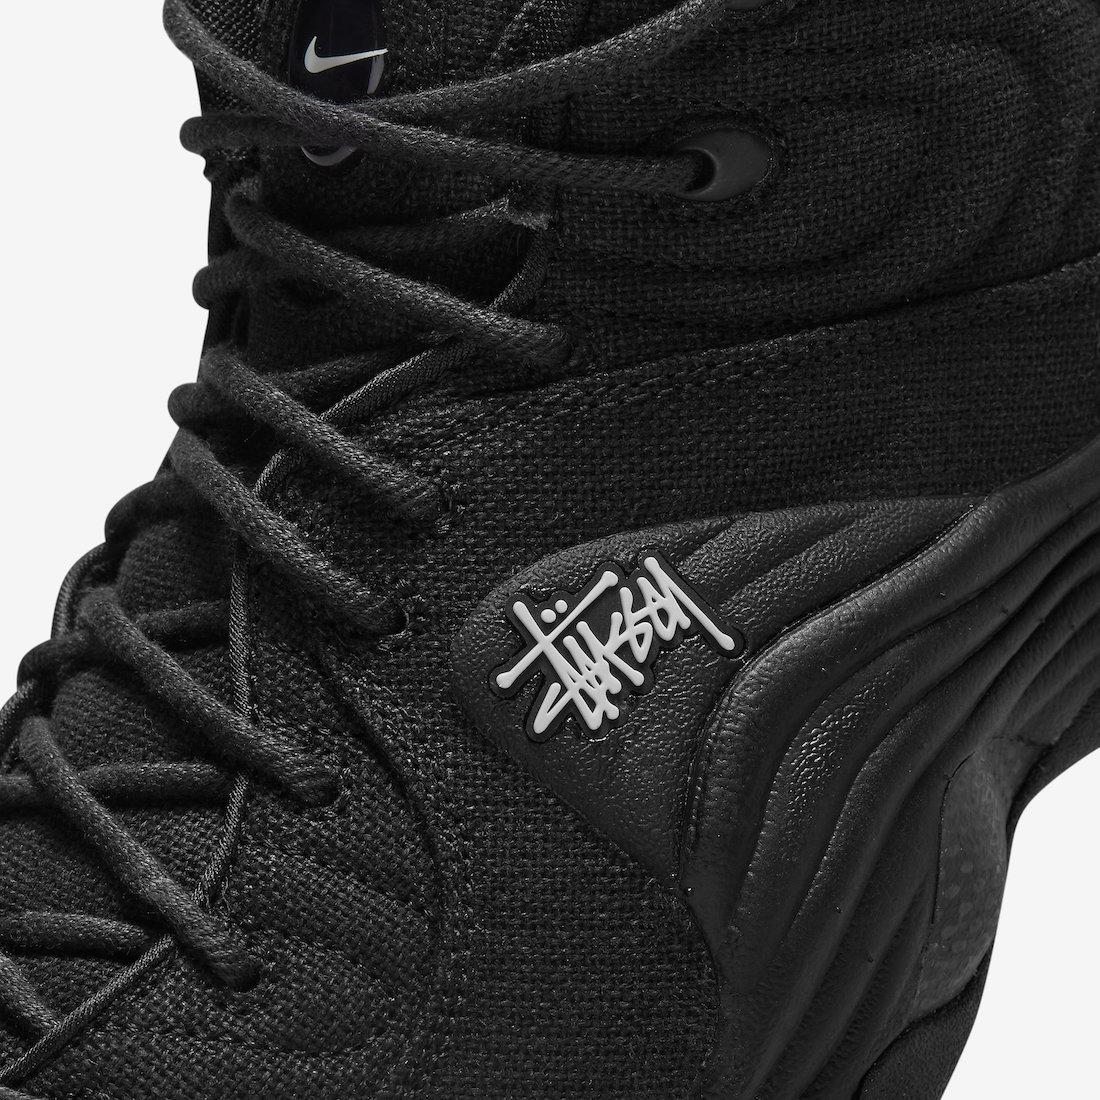 Stussy Nike Air Penny 2 Black DQ5674-001 Release Date